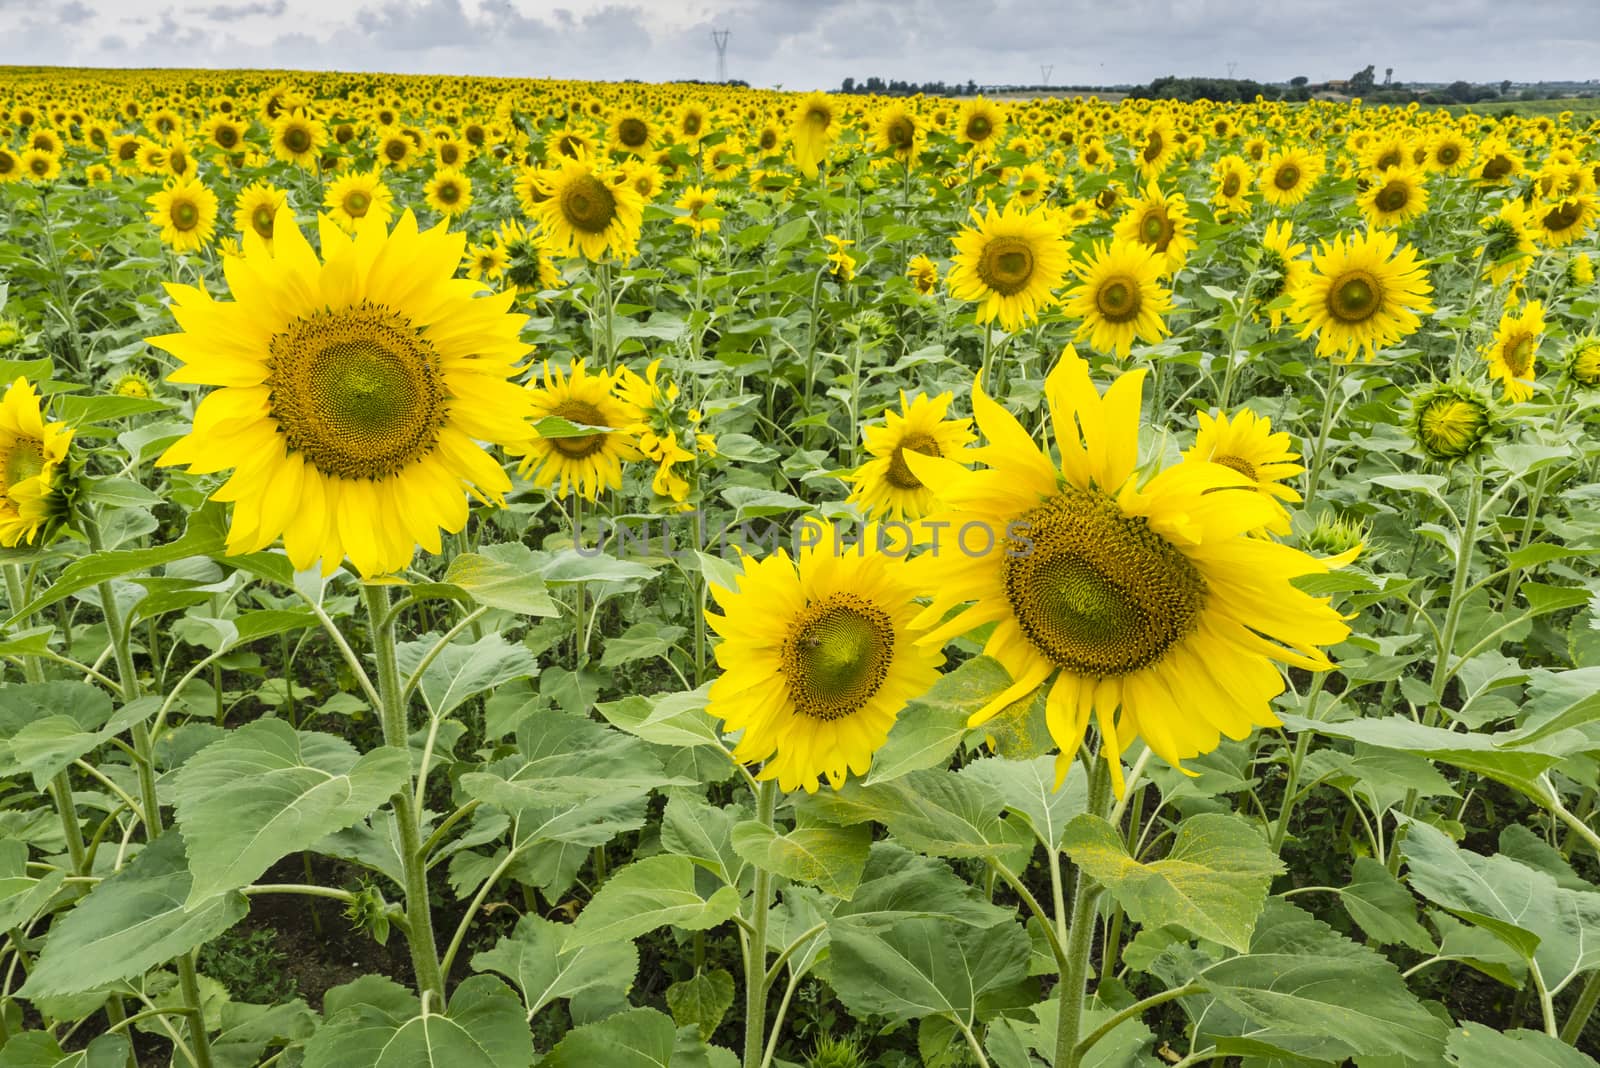 Field of sunflowers in full bloom by AlessandroZocc